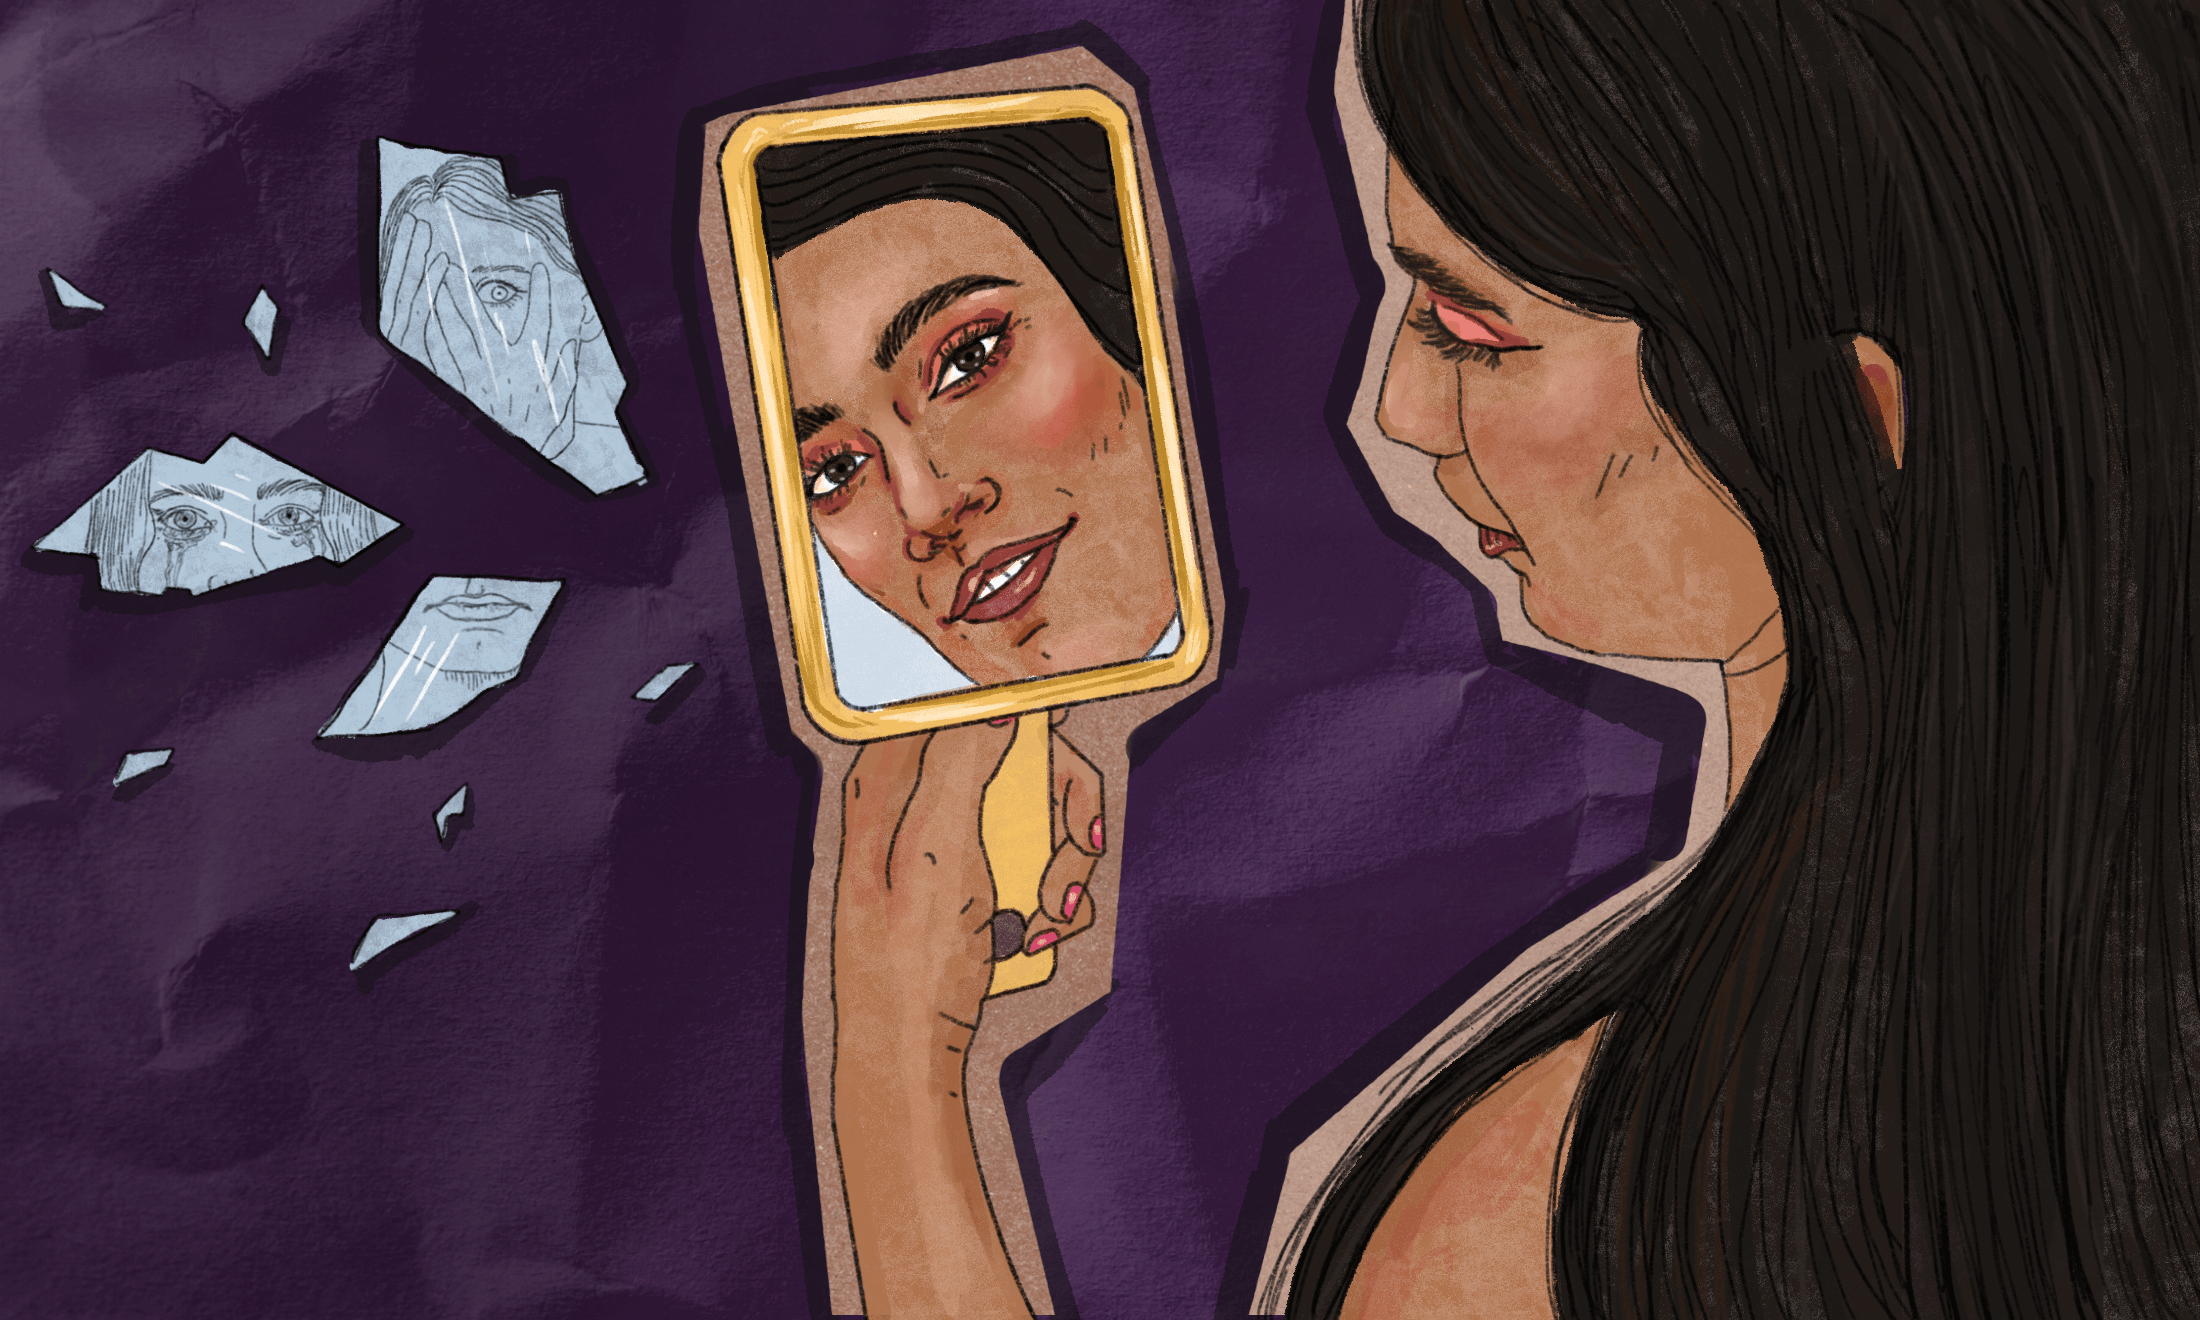 Facing the mirror: unpacking the personal and the political